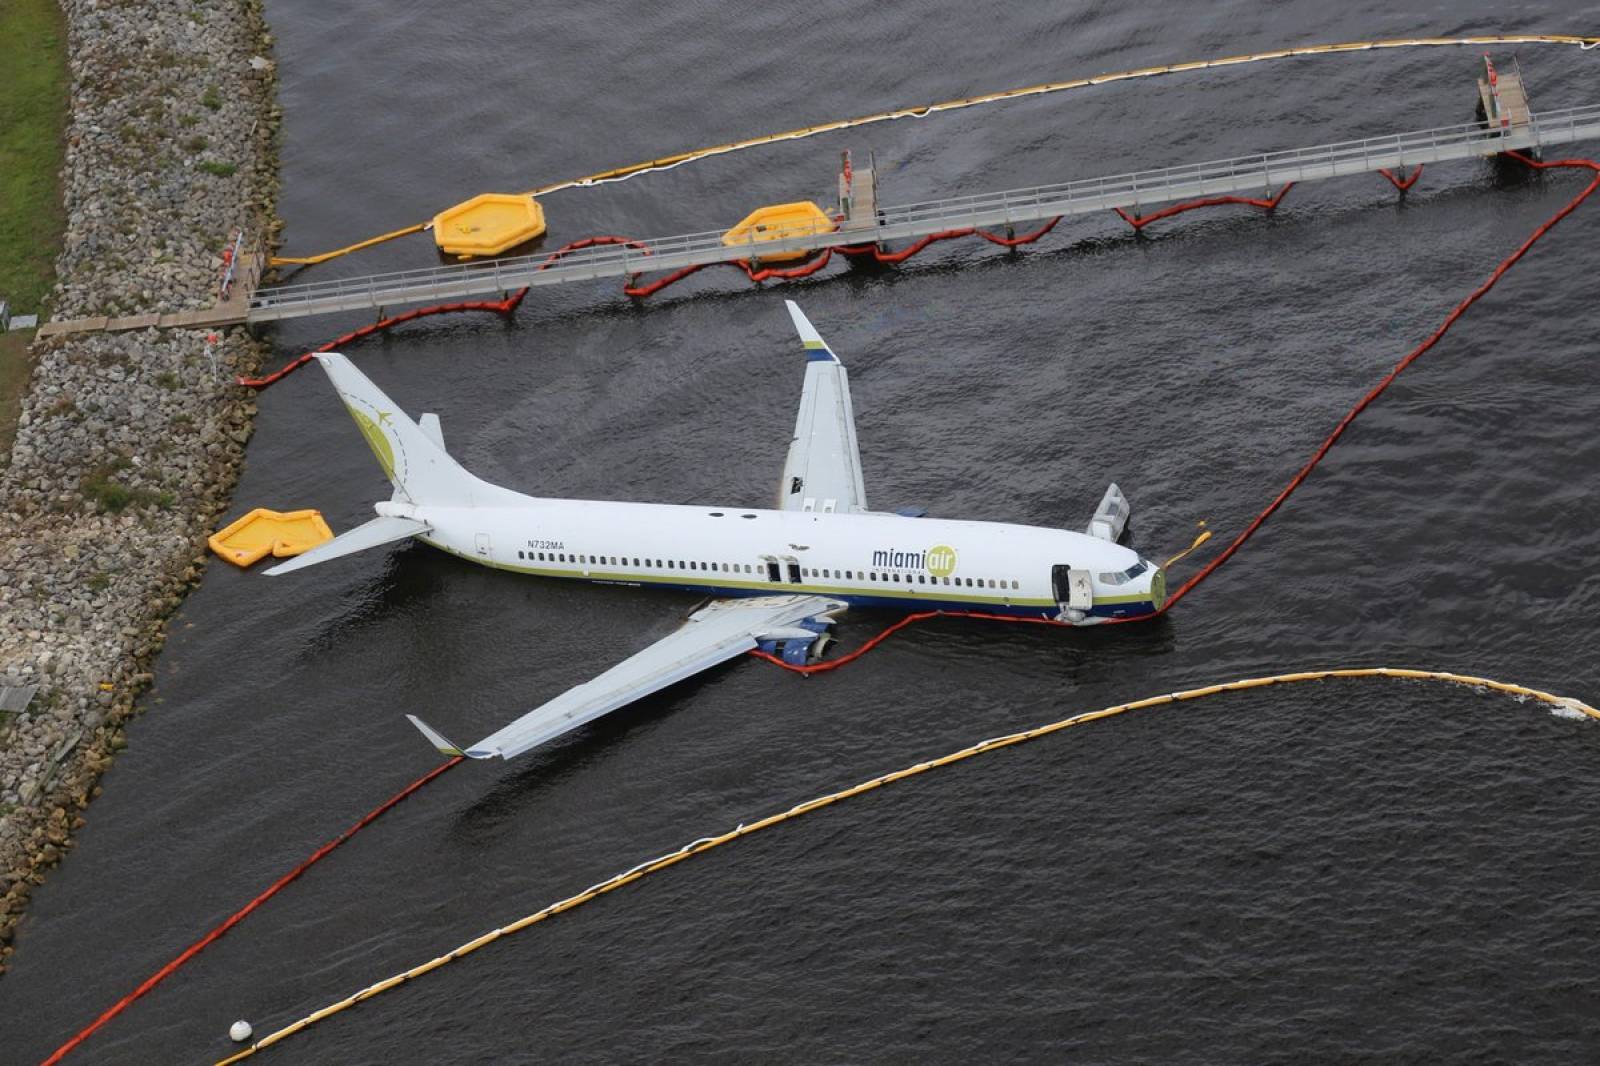 Aerial view of the Miami Air International Boeing 737-800 that overran the runway at NAS Jacksonville